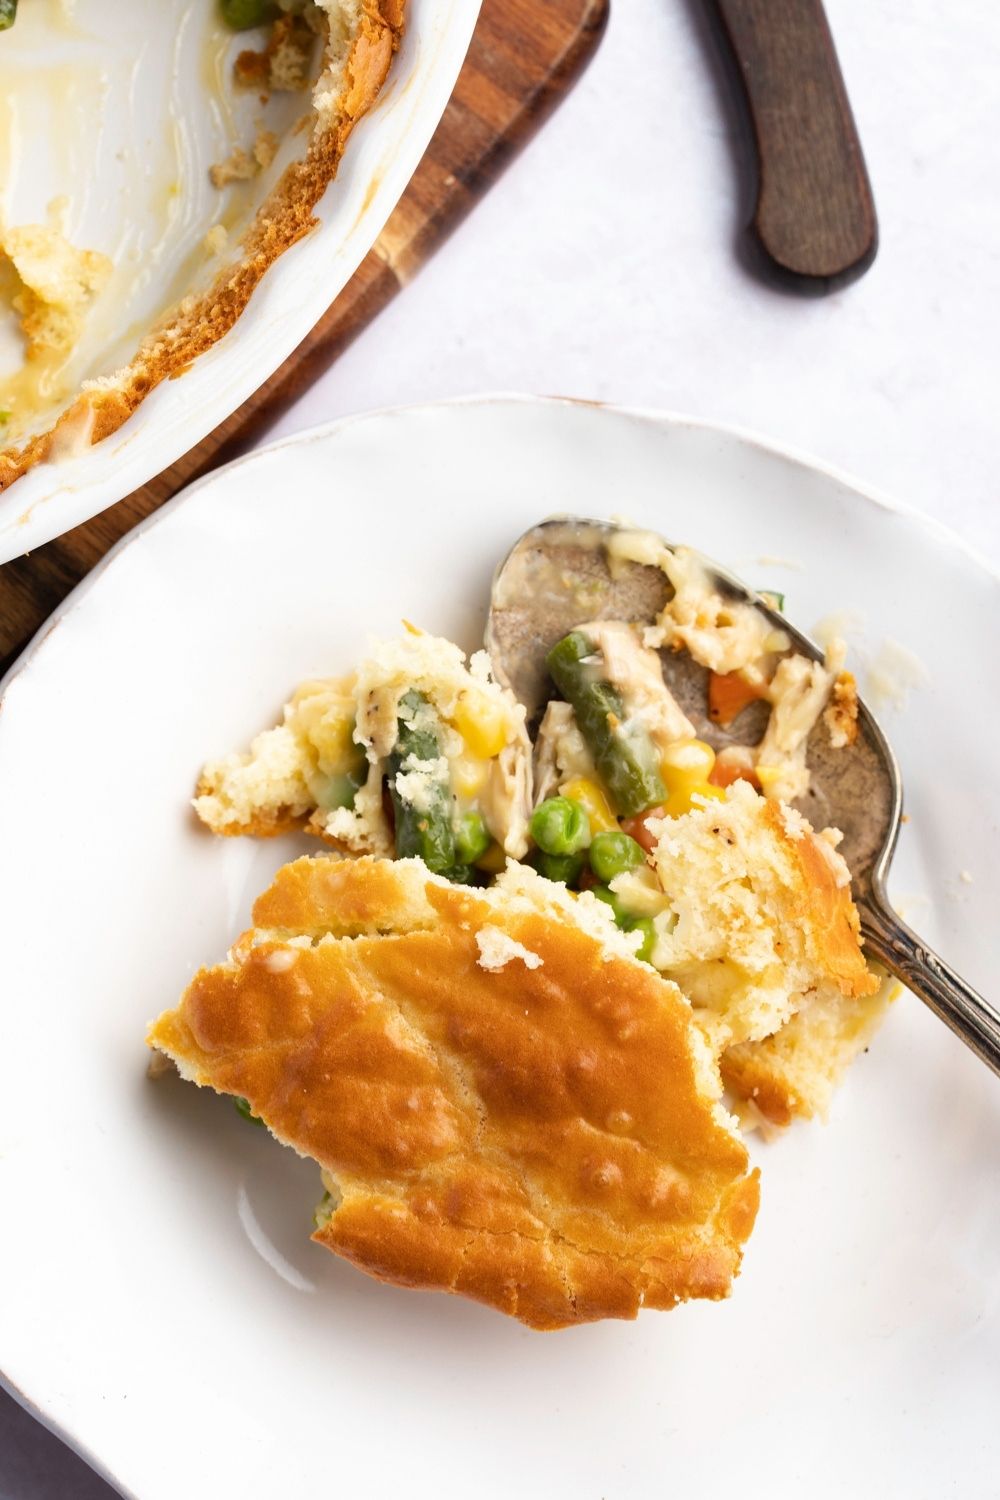 Sumptuous Chicken Pot Pie with Chicken and Vegetables in a Plate